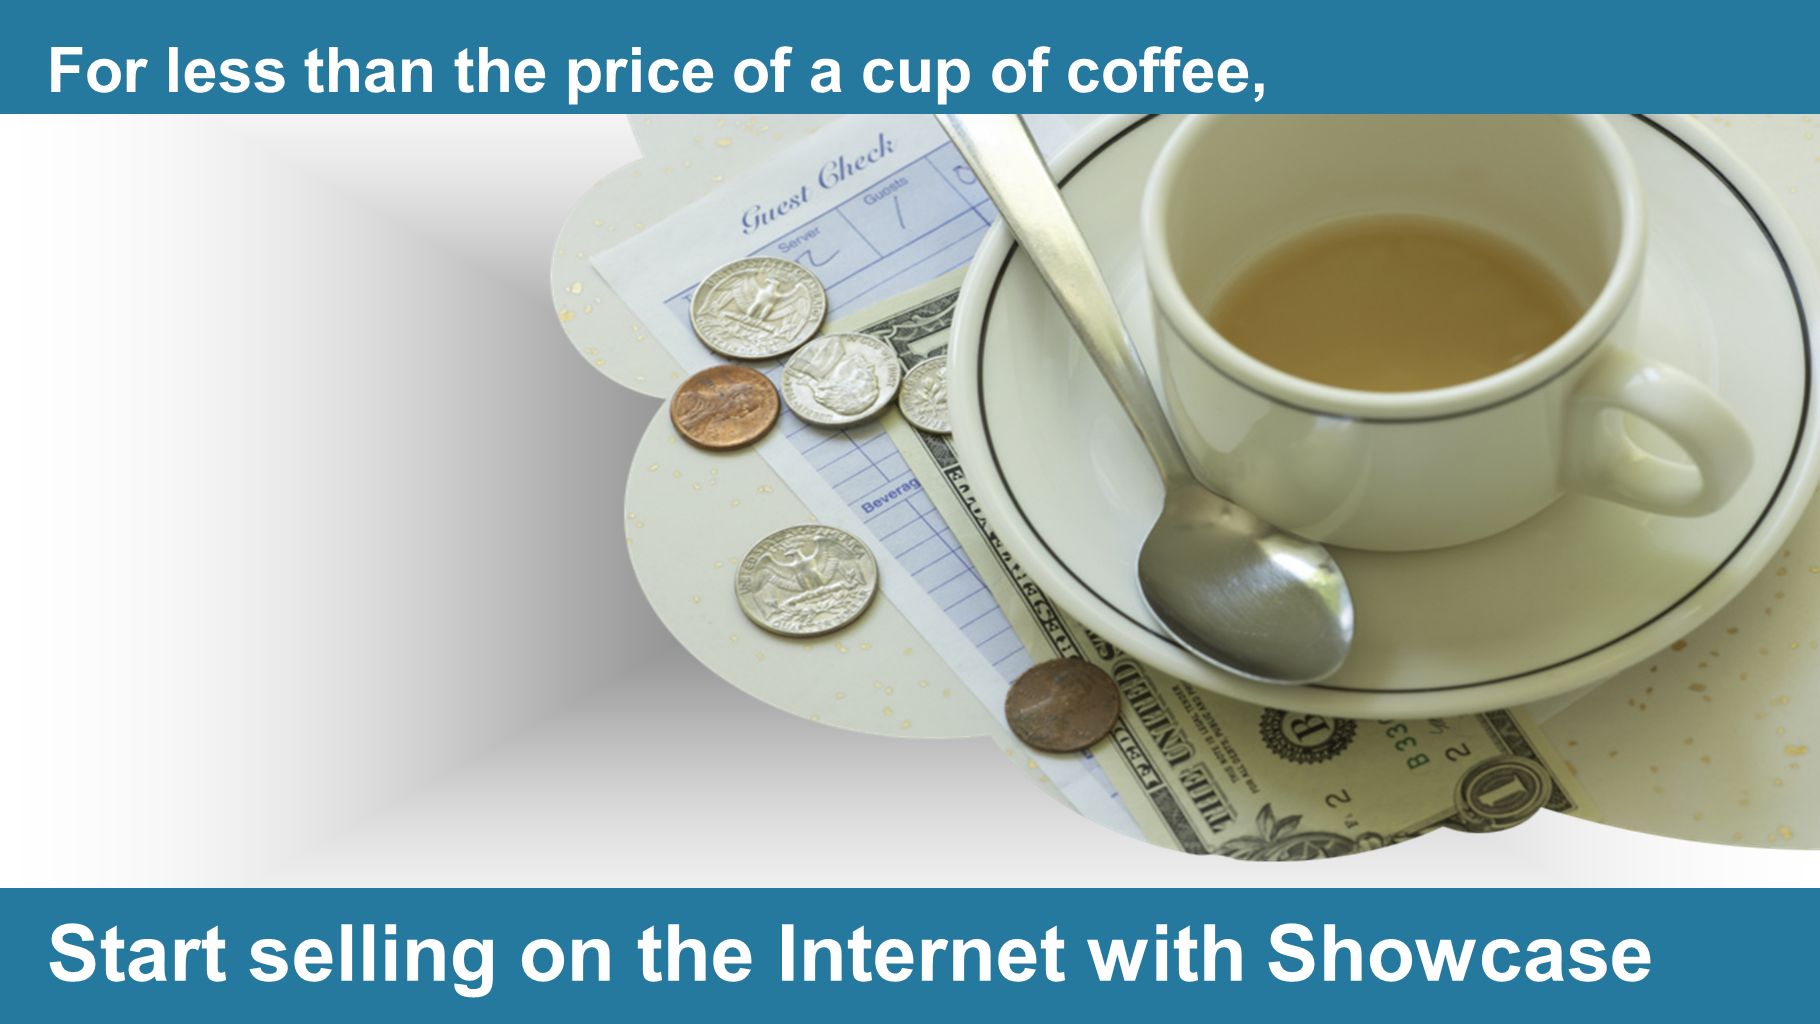 Start selling on the Internet with Showcase For less than the price of a cup of coffee,